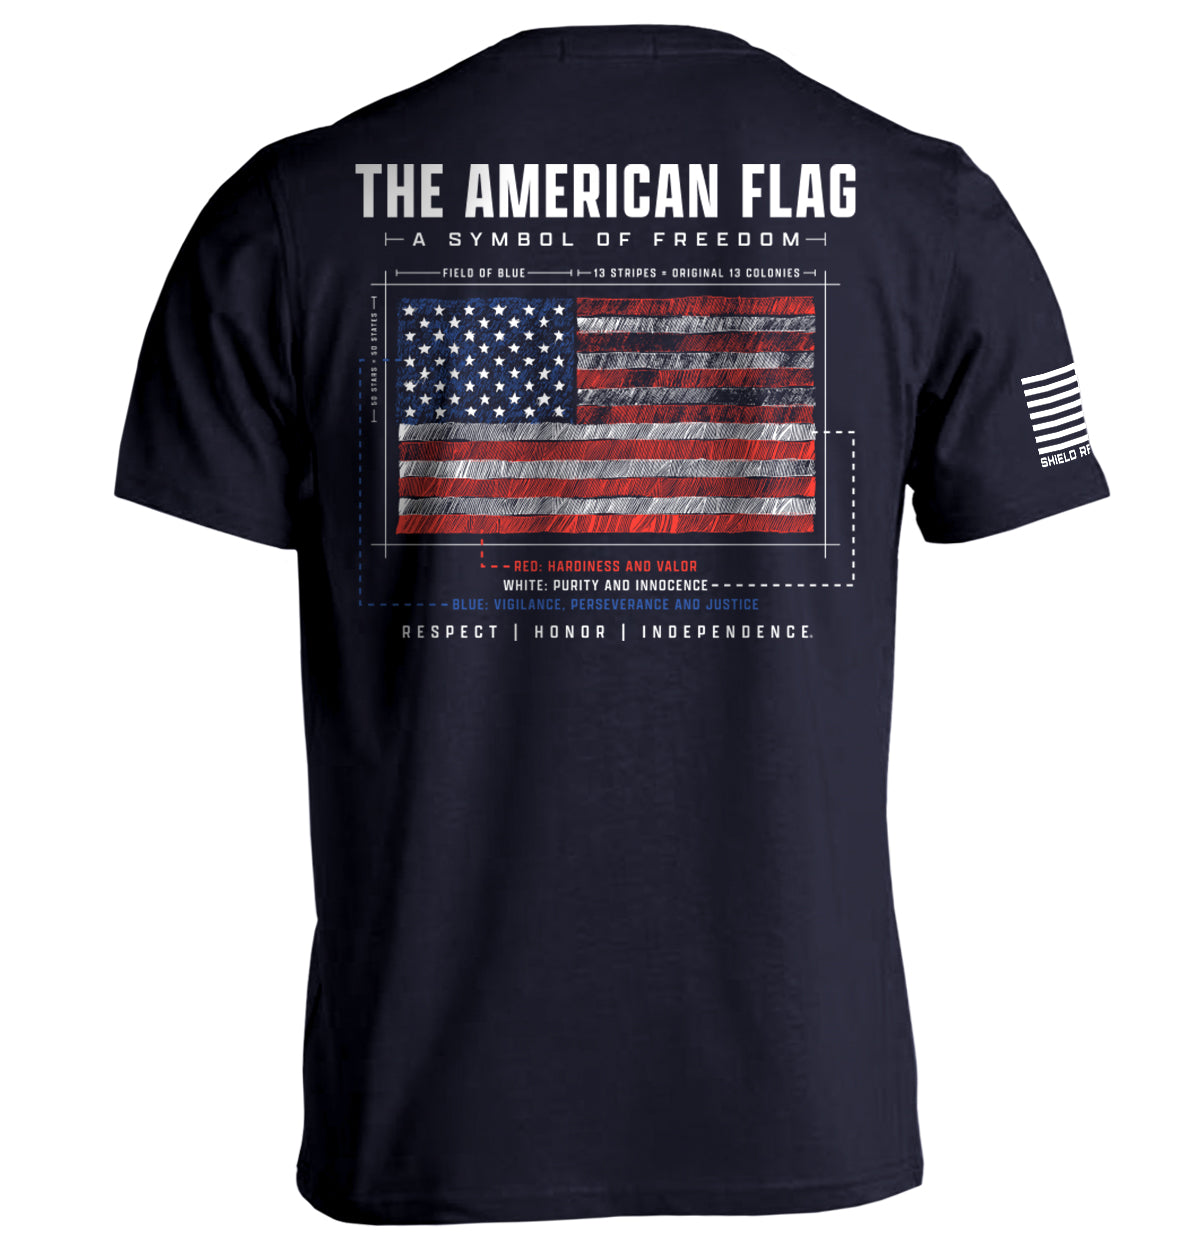 The American Flag- A Symbol of Freedom